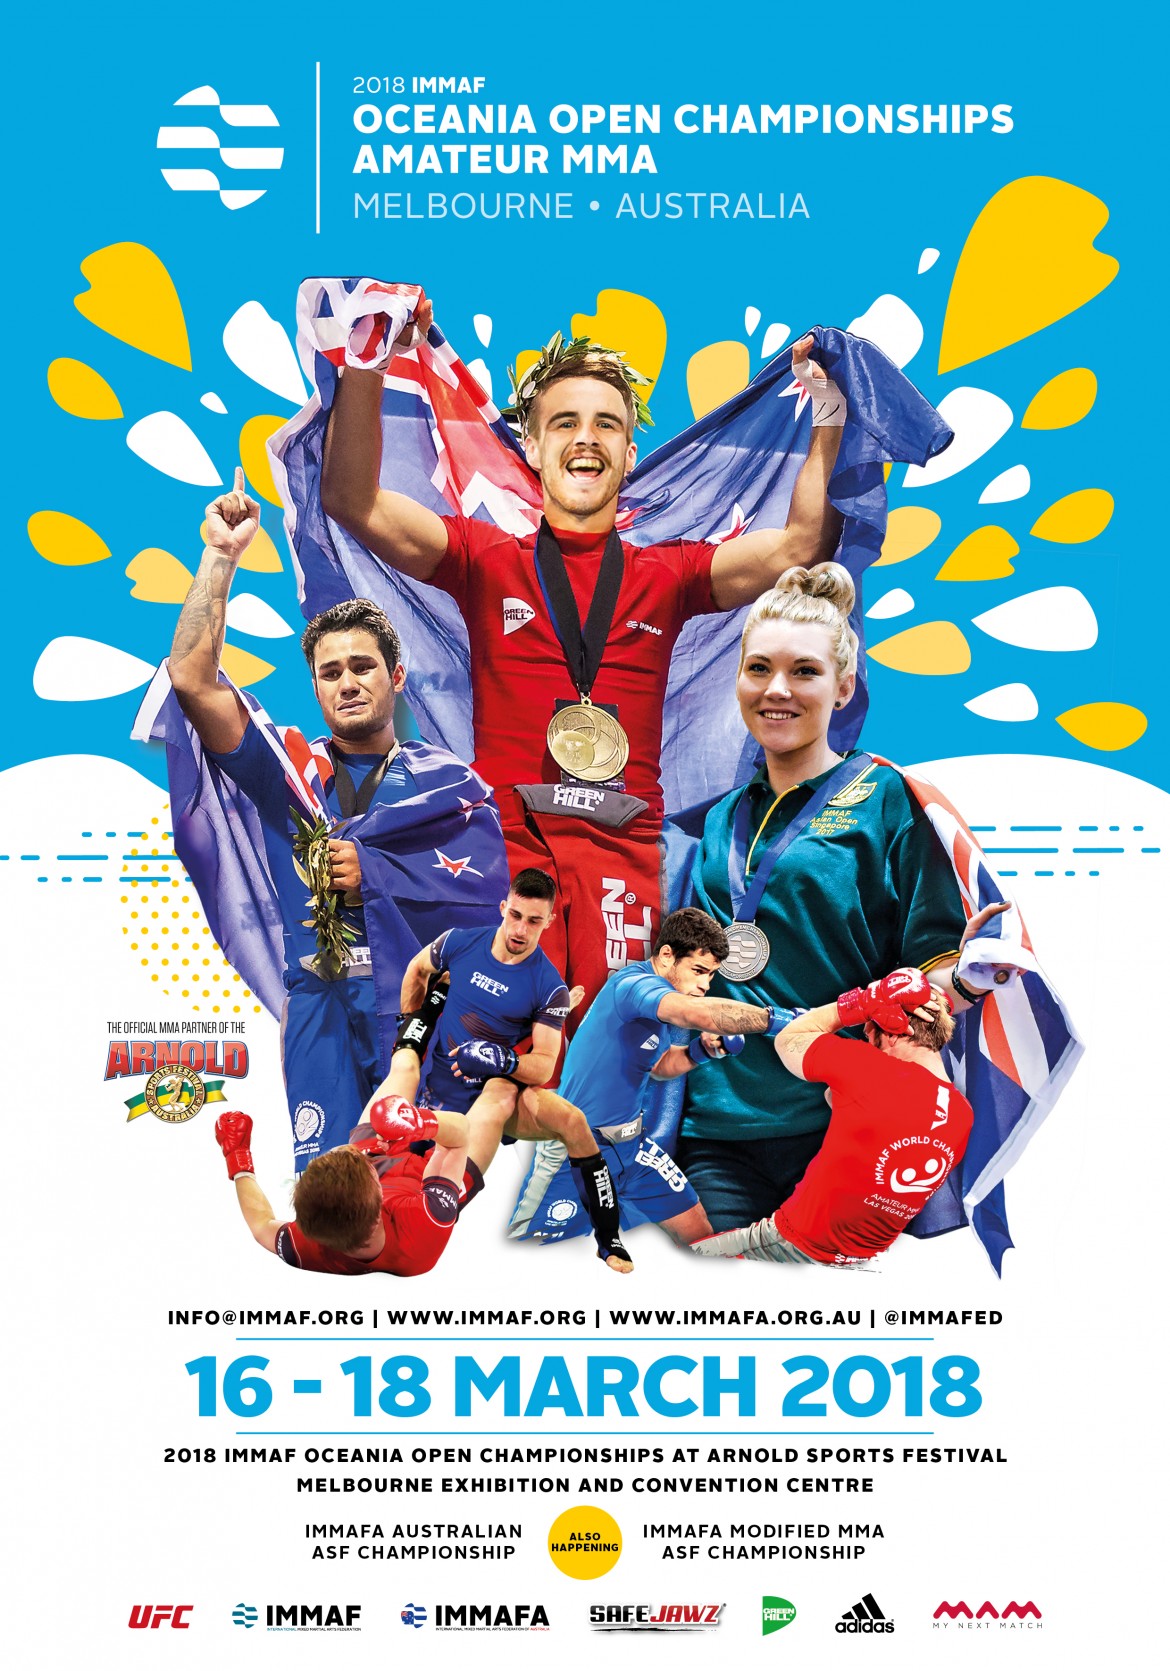 IMMAF ANNOUNCES FIRST OCEANIA OPEN CHAMPIONSHIPS